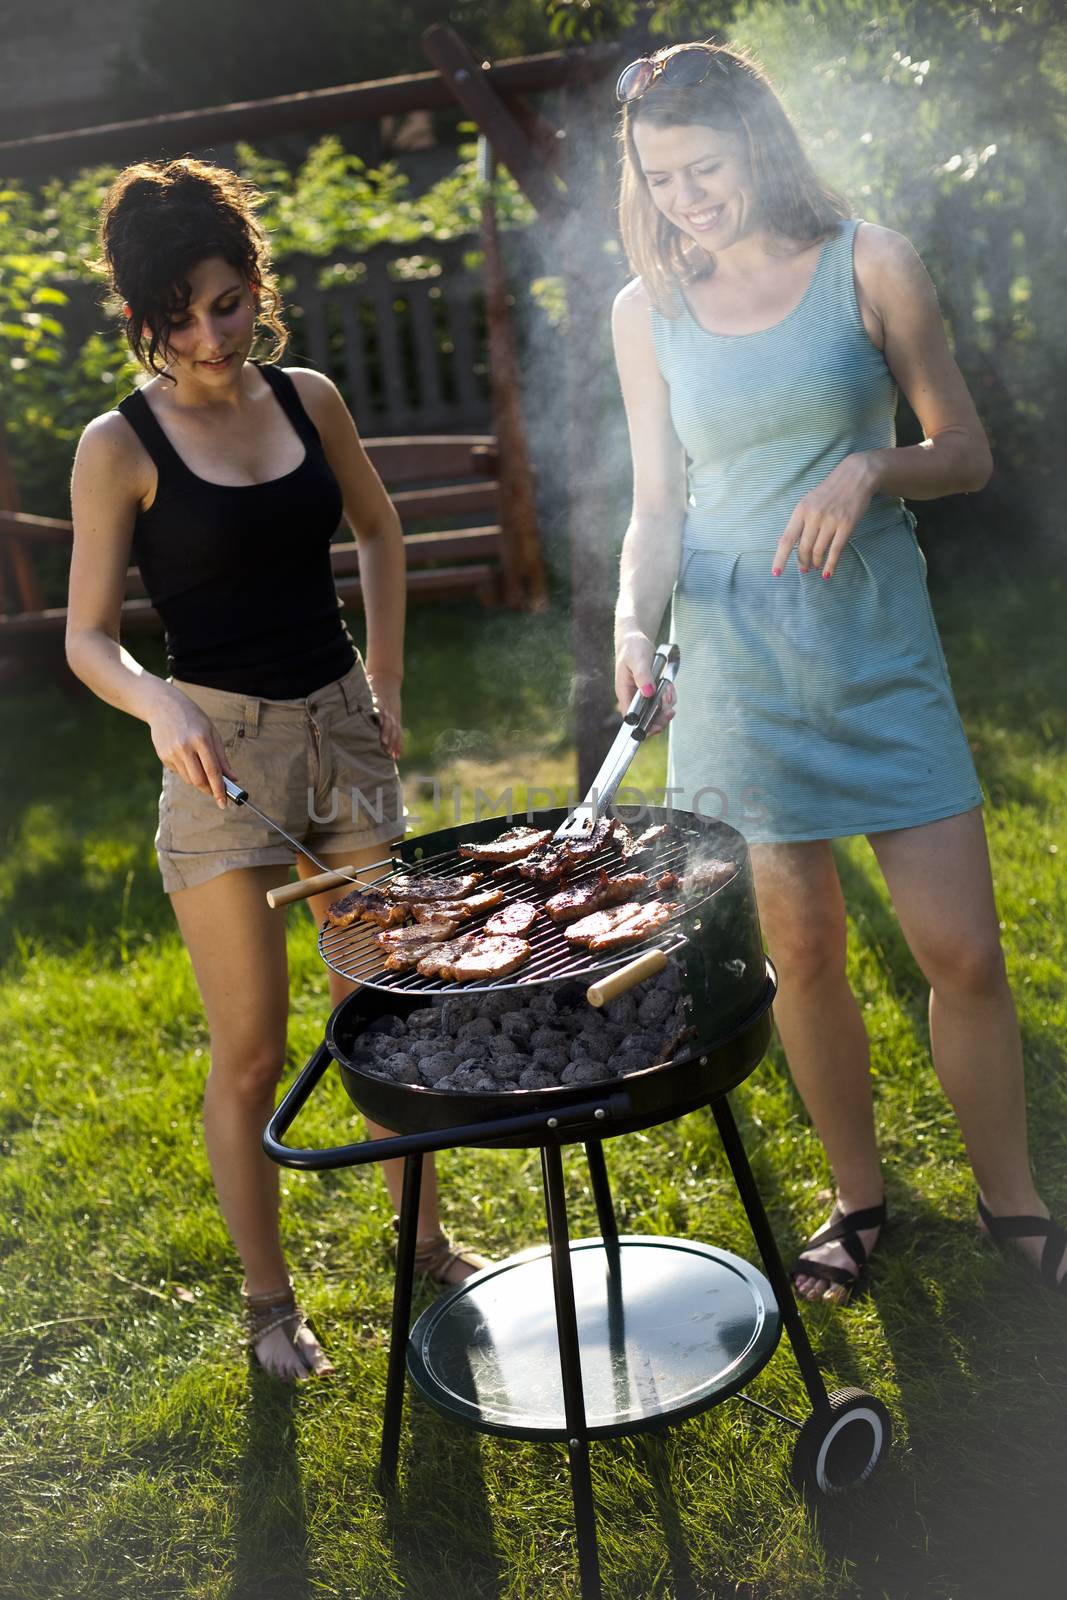 Two girls on grill, natural colorful tone by JanPietruszka